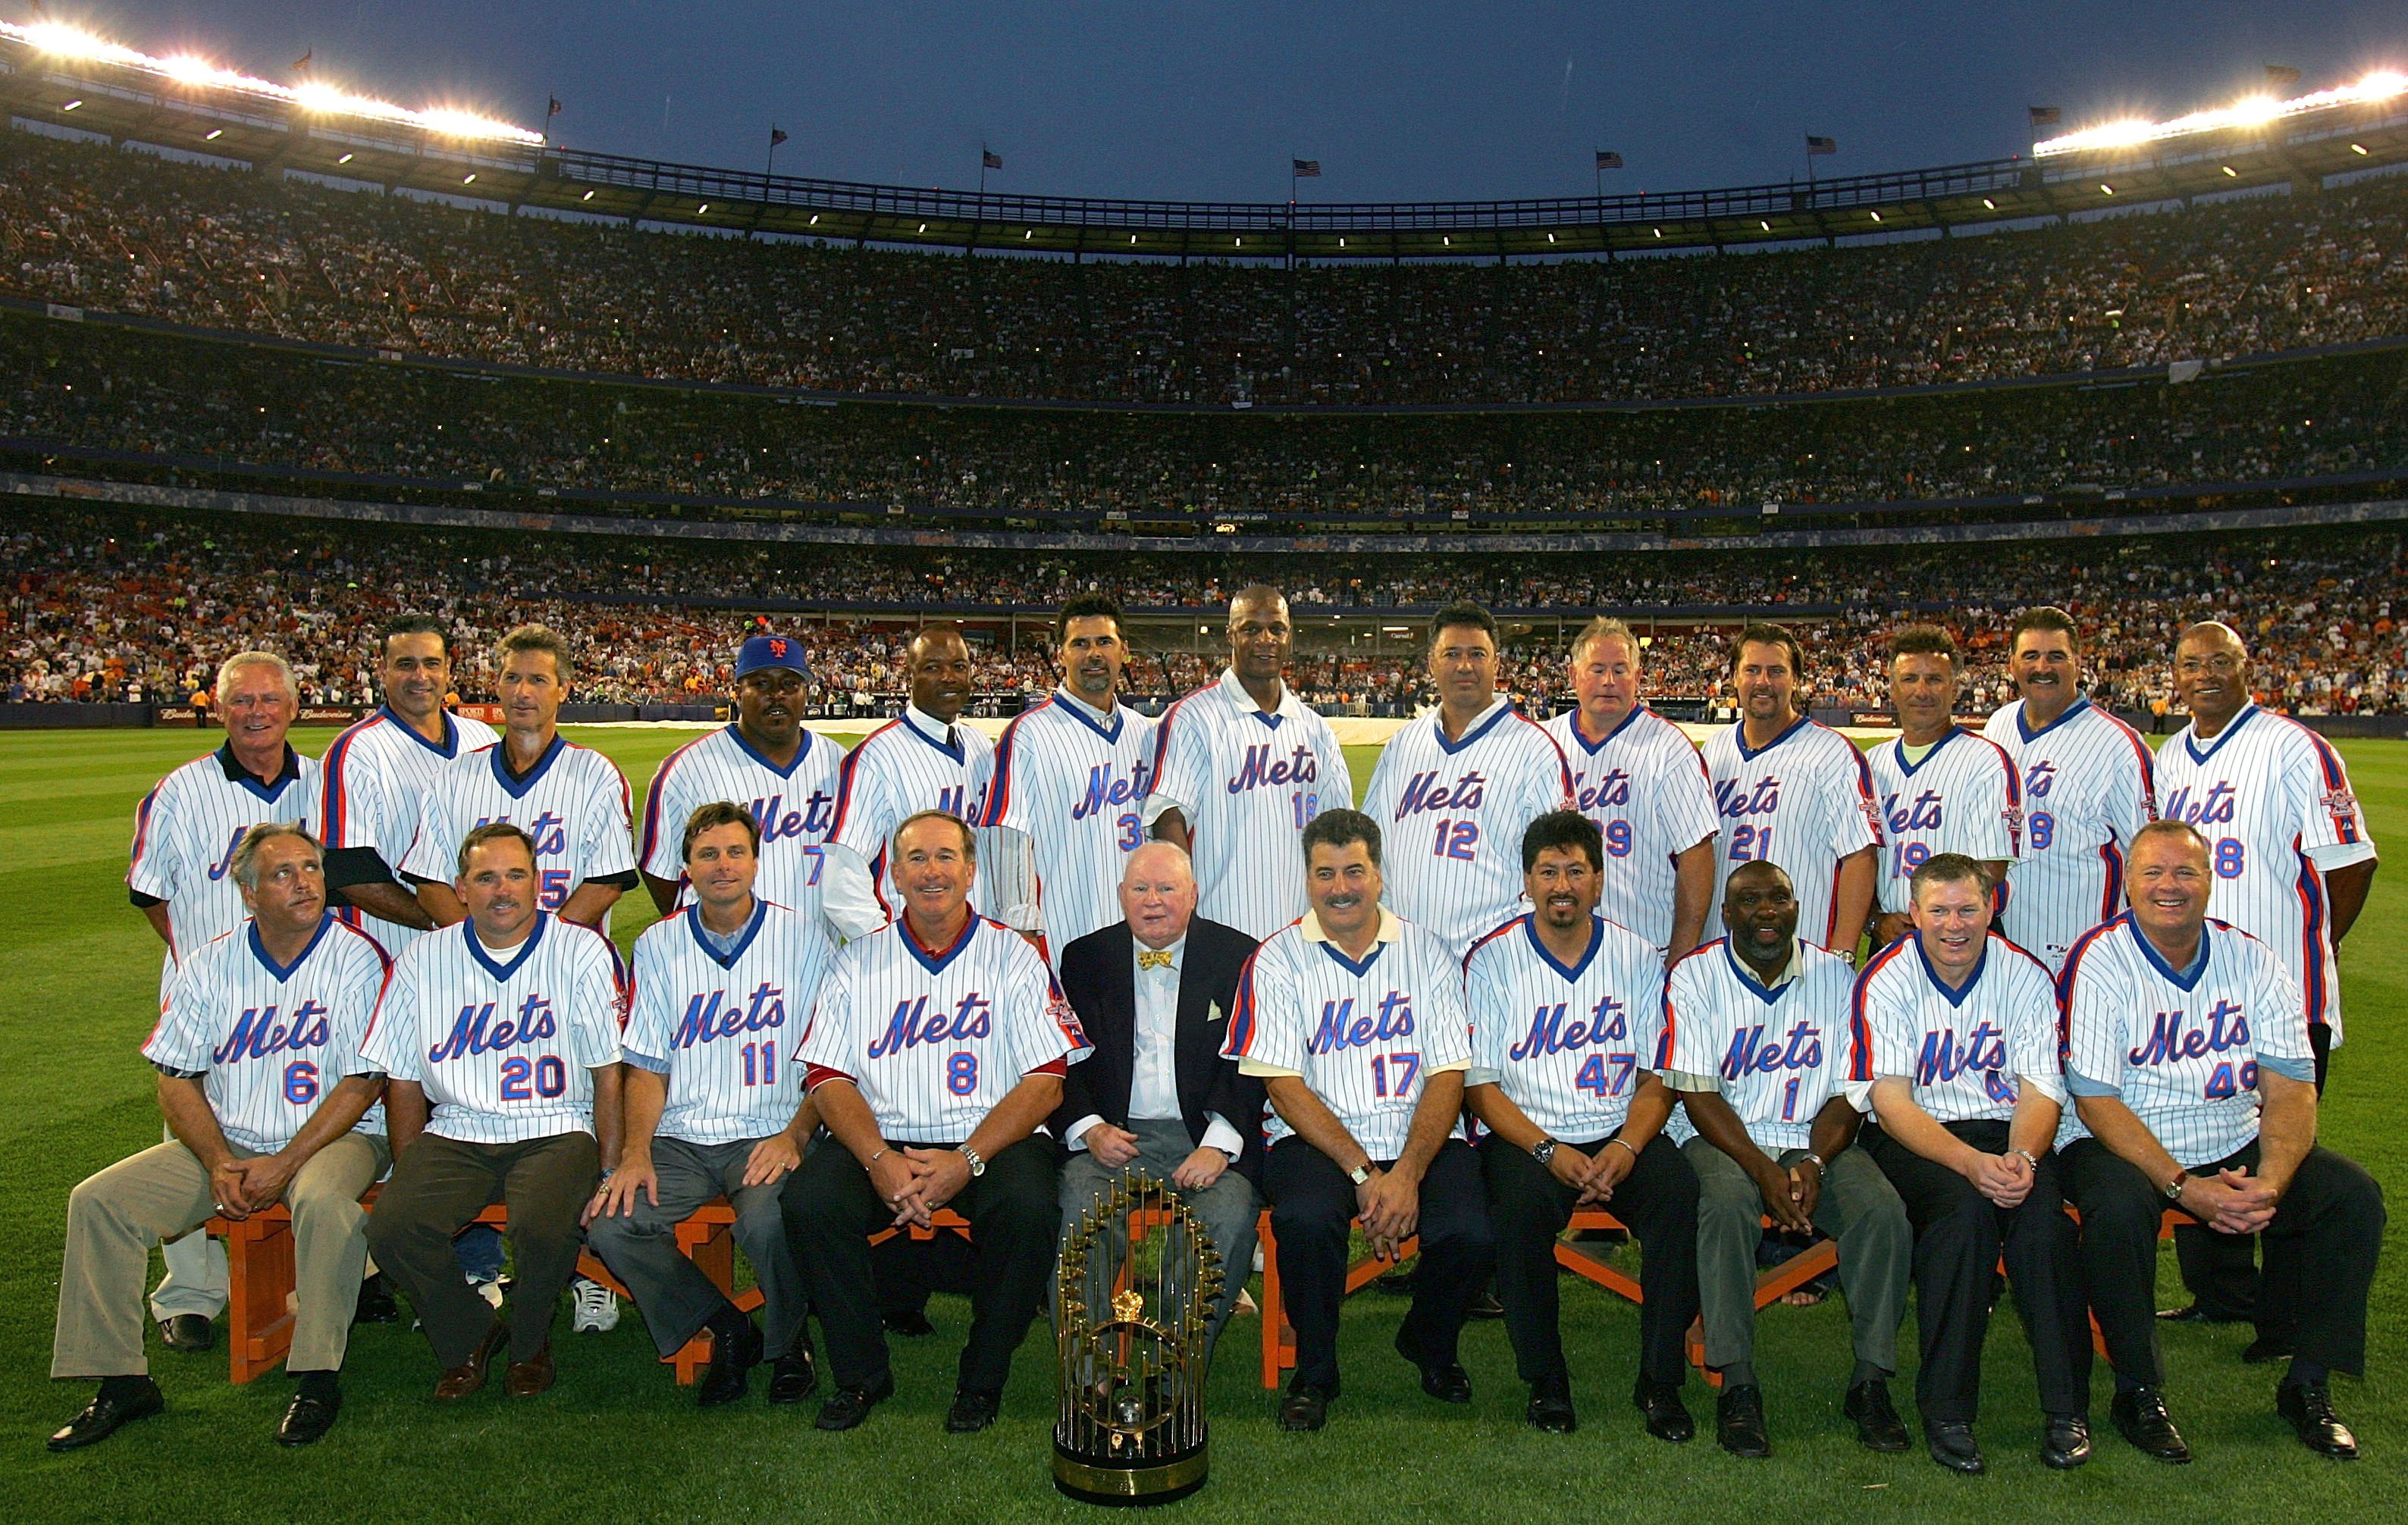 The Mets of '86 Look at the Mets of Today - The New York Times